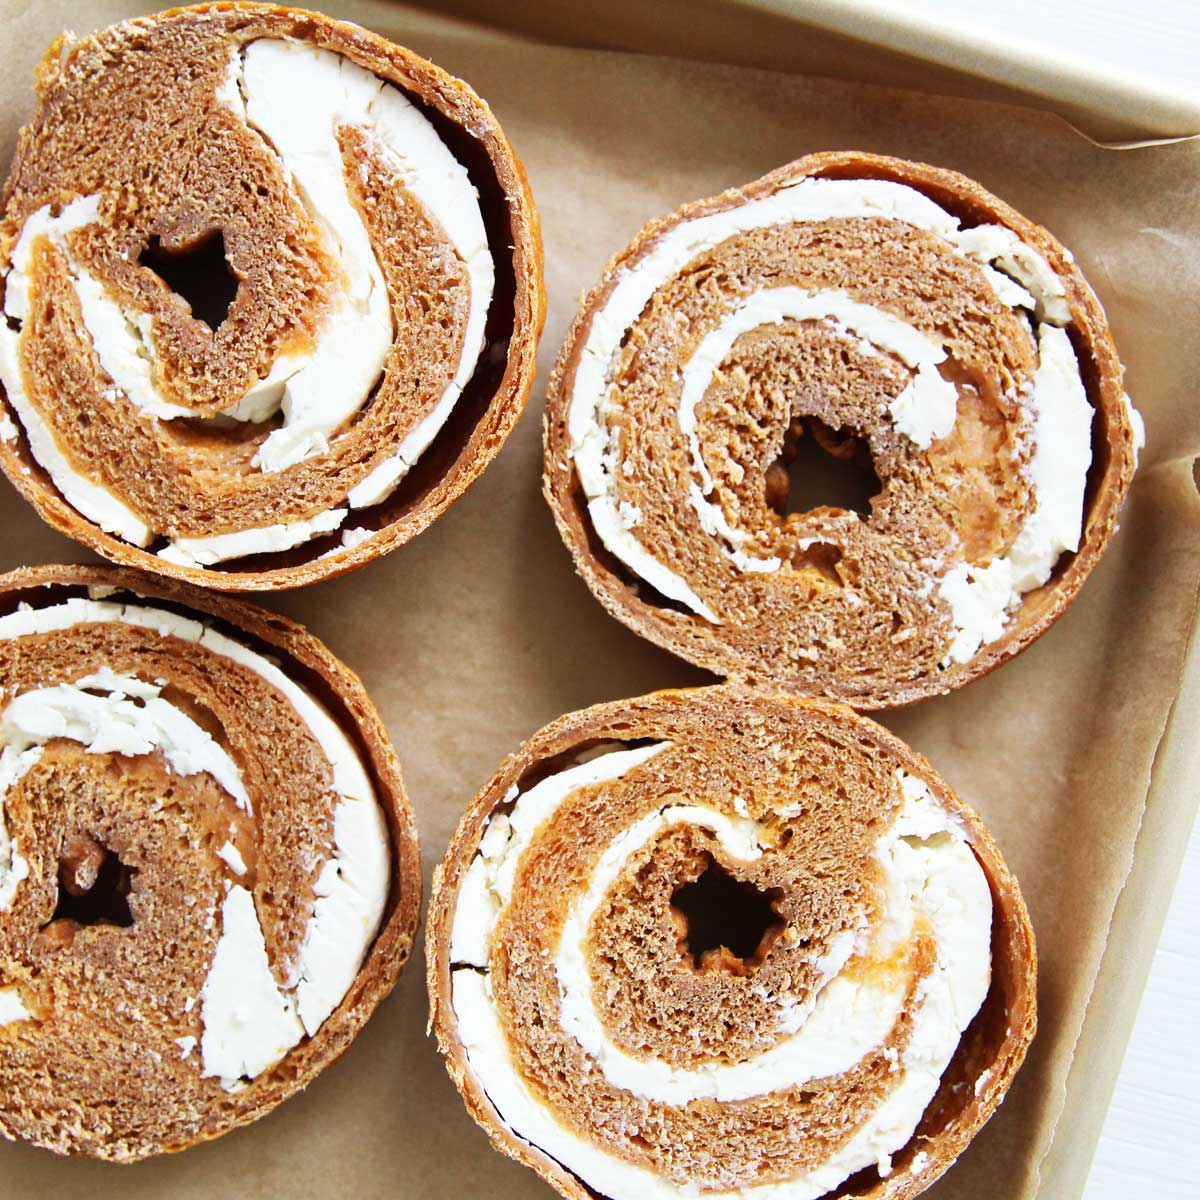 Healthy Pumpkin Bagels Stuffed with Cream Cheese (with Step-by-Step Photos) - Pumpkin Chocolate Frosting